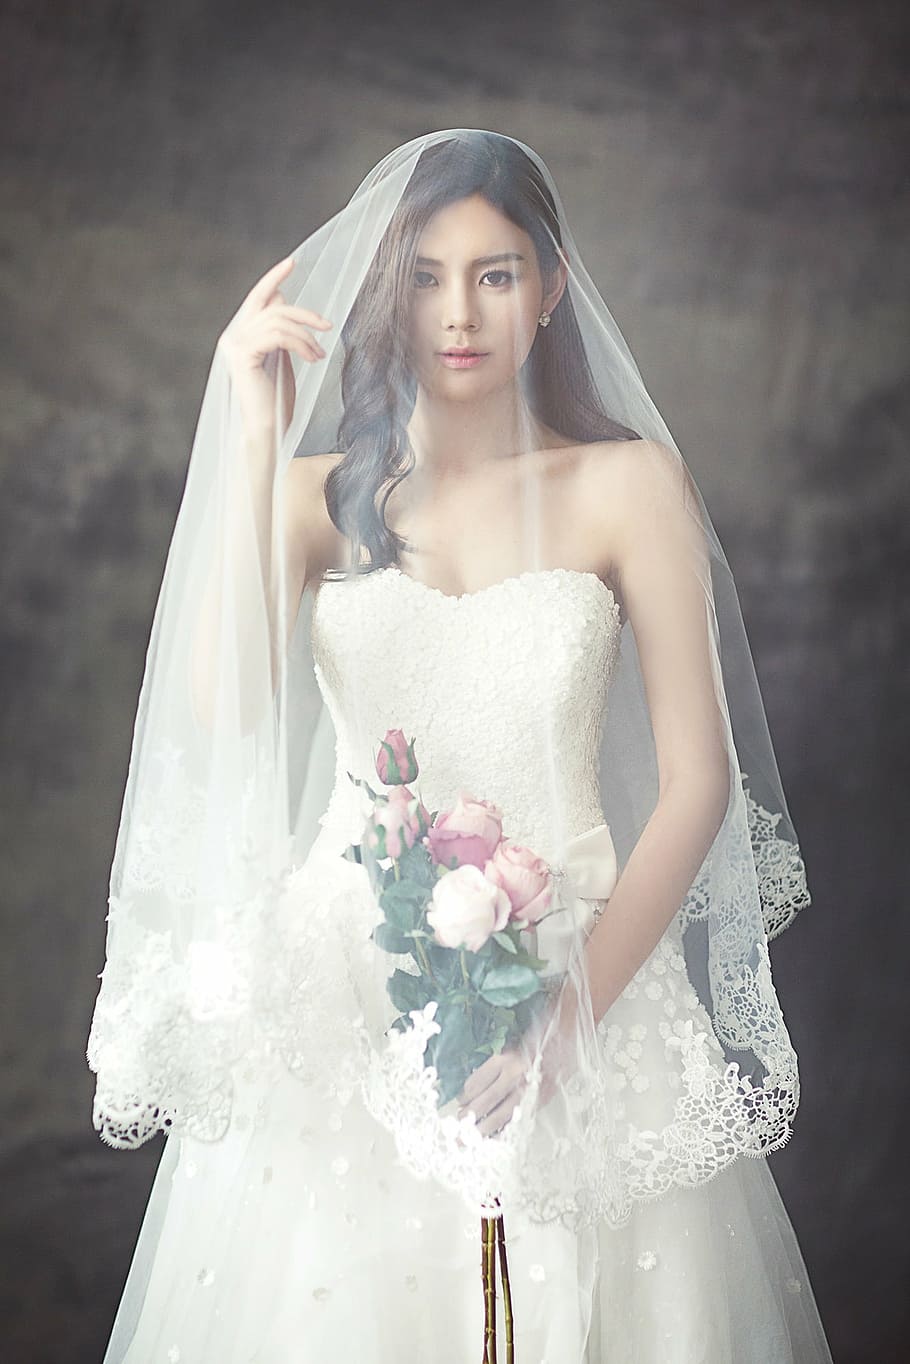 woman, wearing, white, wedding gown, holding, bouquet, flowers, wedding dresses, fashion, character